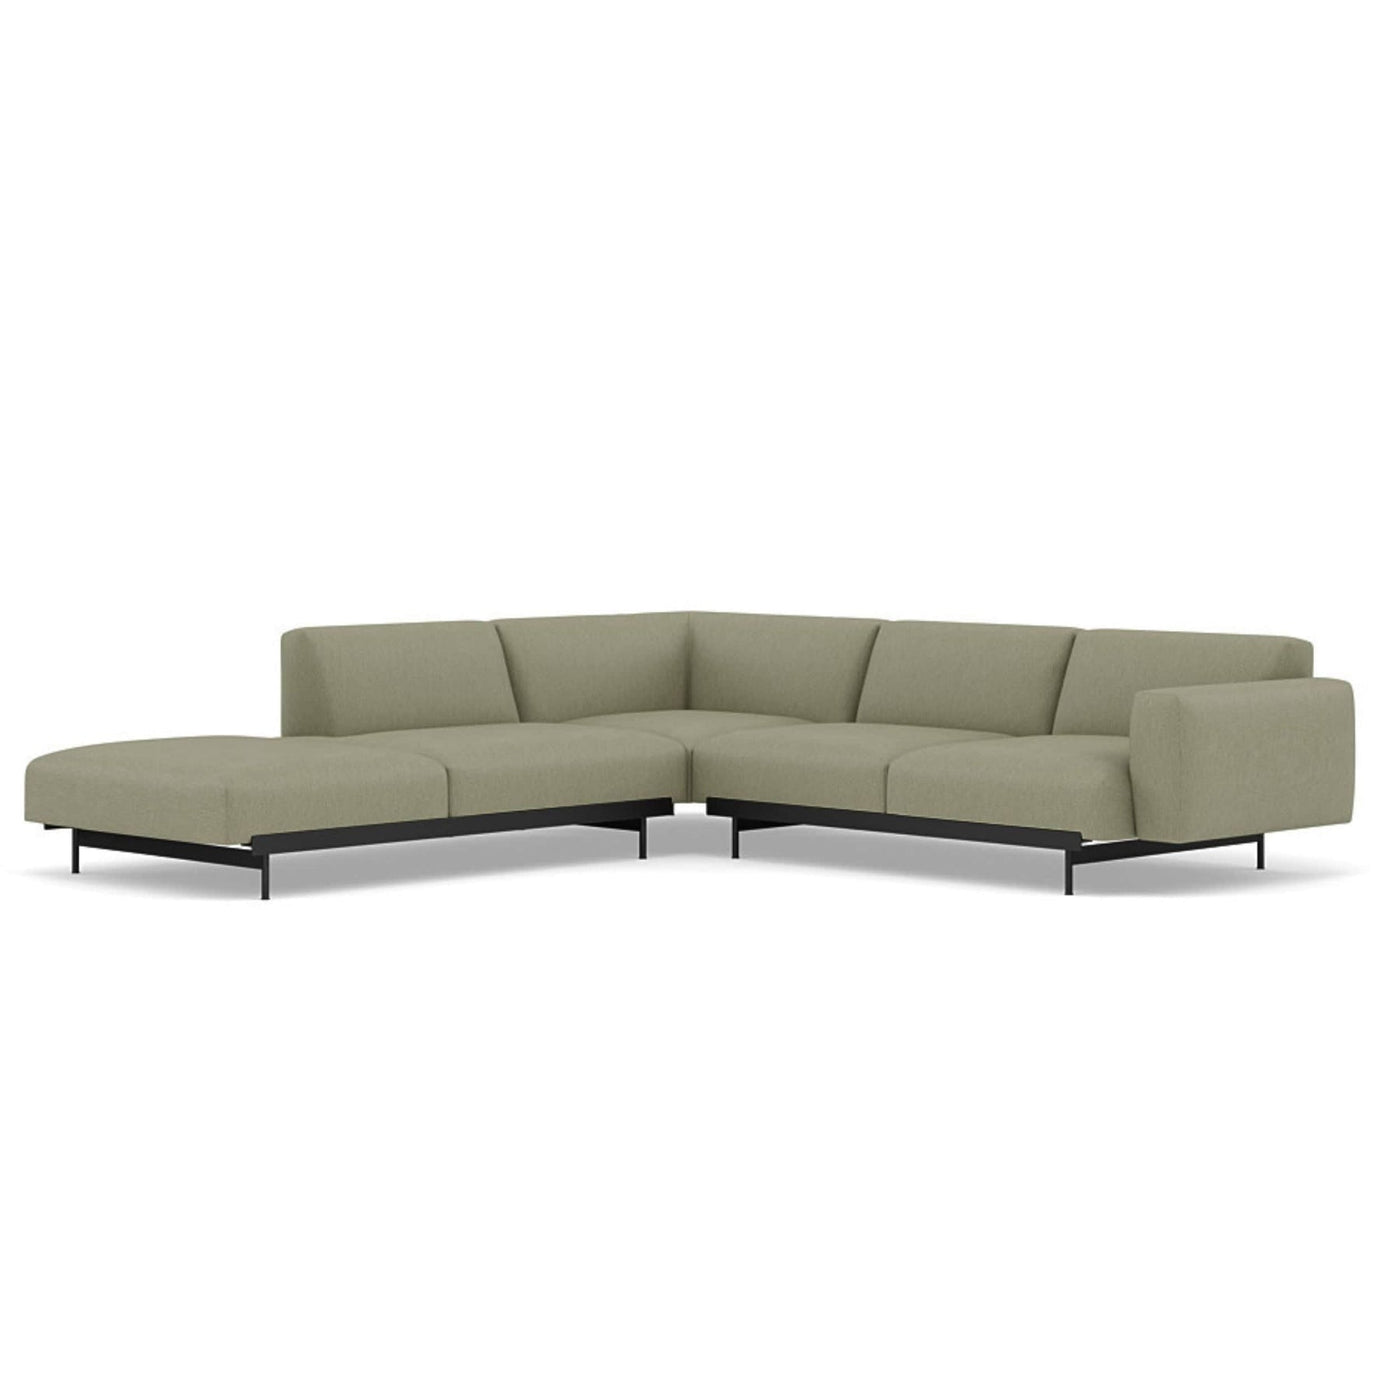 Muuto In Situ Modular Corner Sofa. Made to order  from someday designs. #colour_clay-15